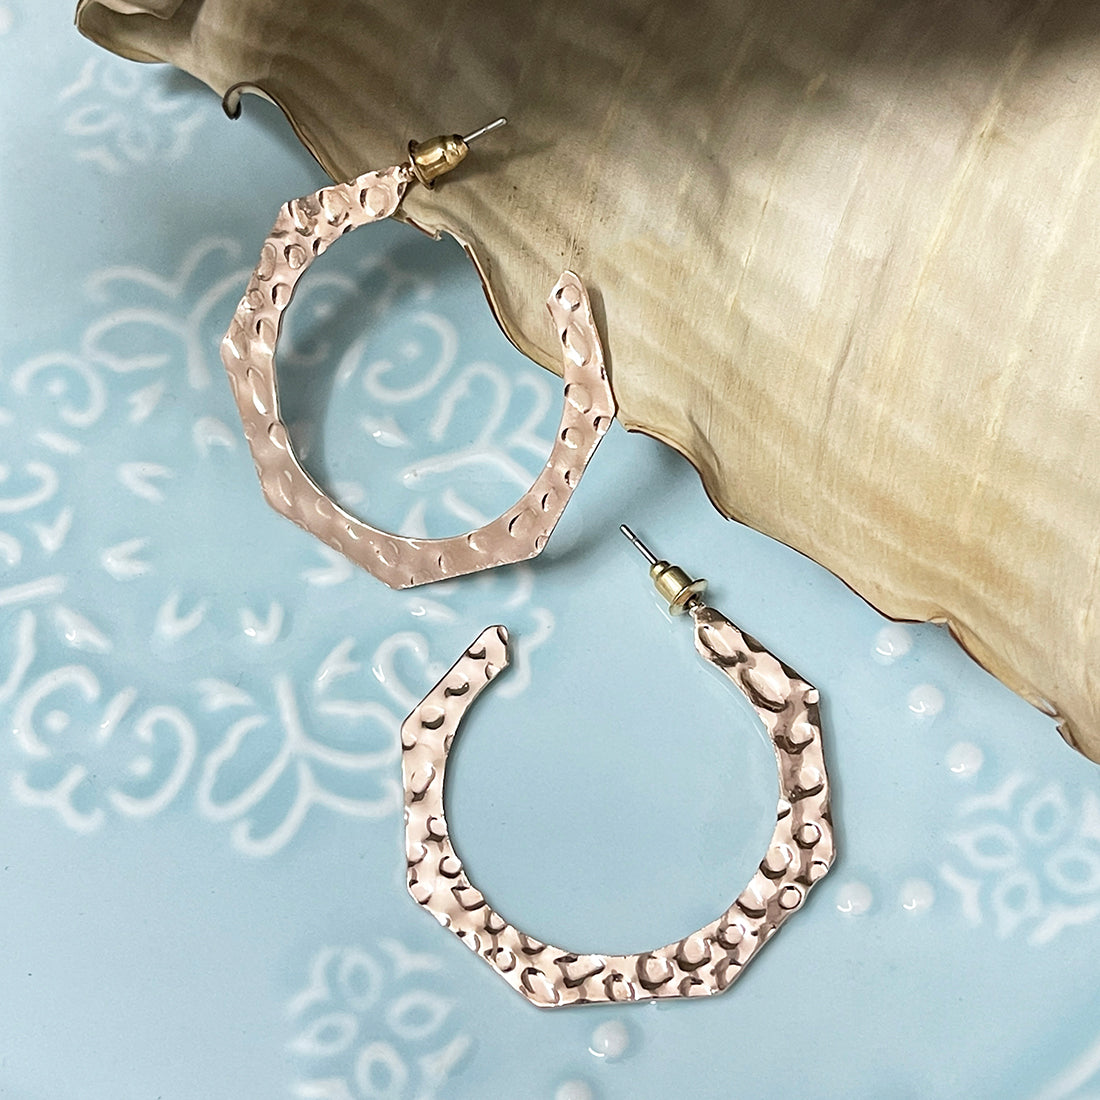 Contemporary Rose Gold-Toned Textured Hammered Geometric Open-Hoop Earrings